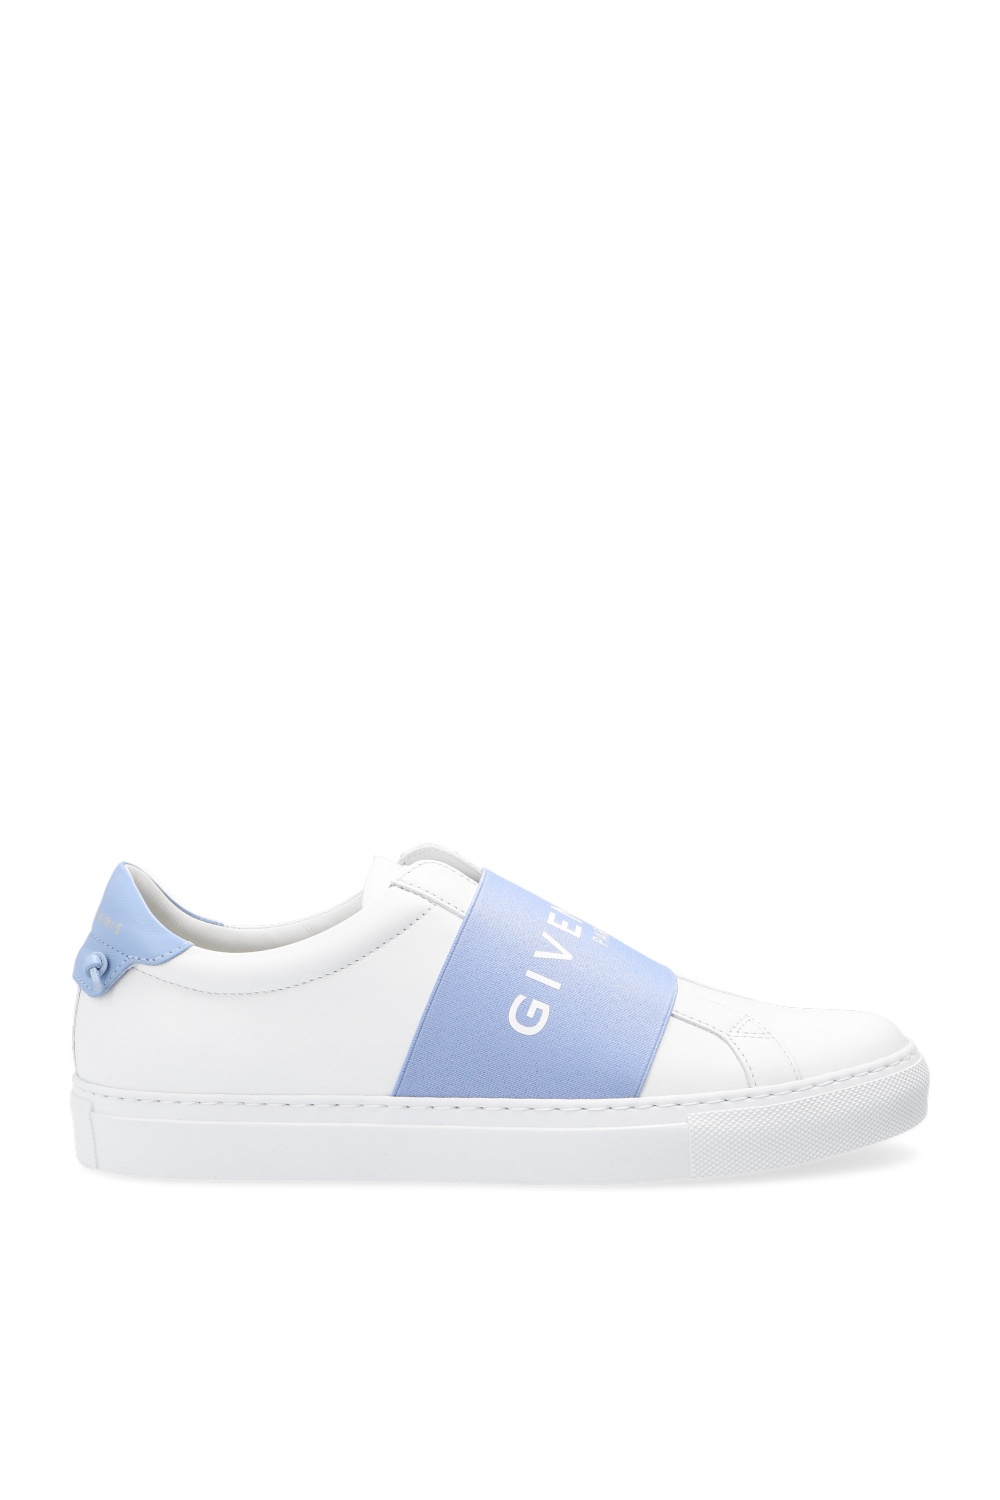 Buy > givenchy sneakers australia > in stock